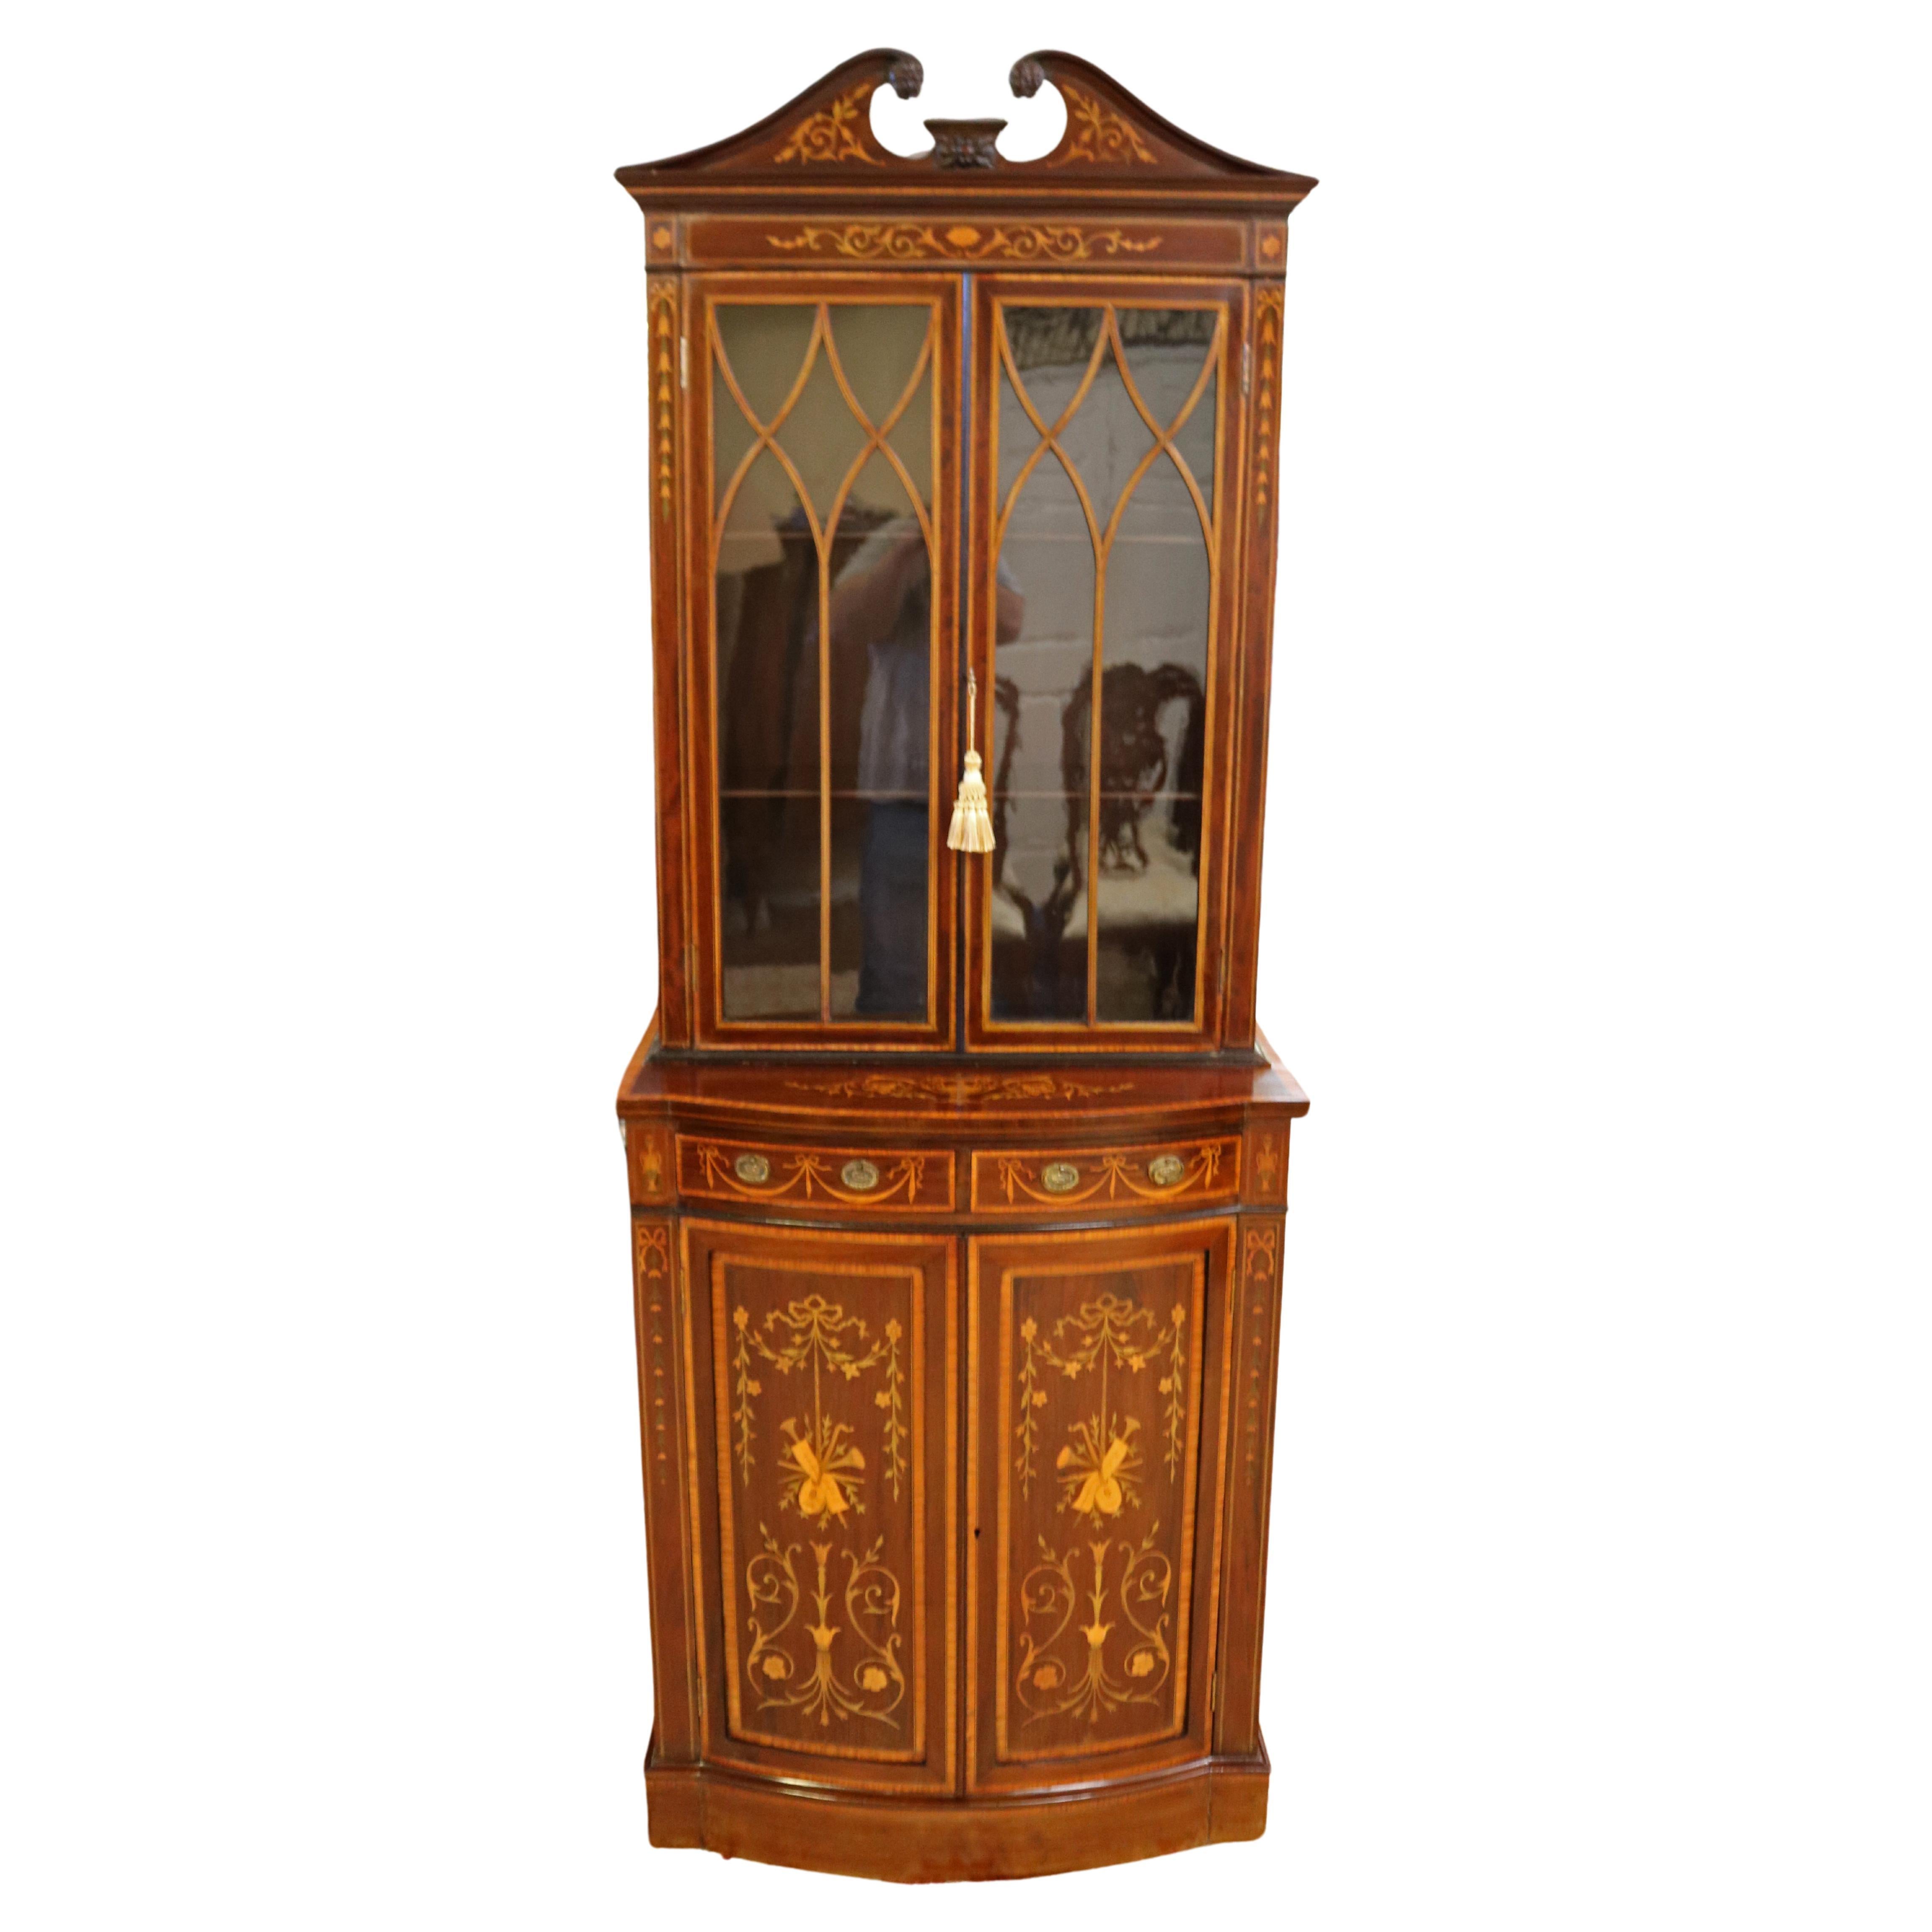 19th Century Edwardian Mahogany Inlaid Cabinet Made By S & H Jewell London